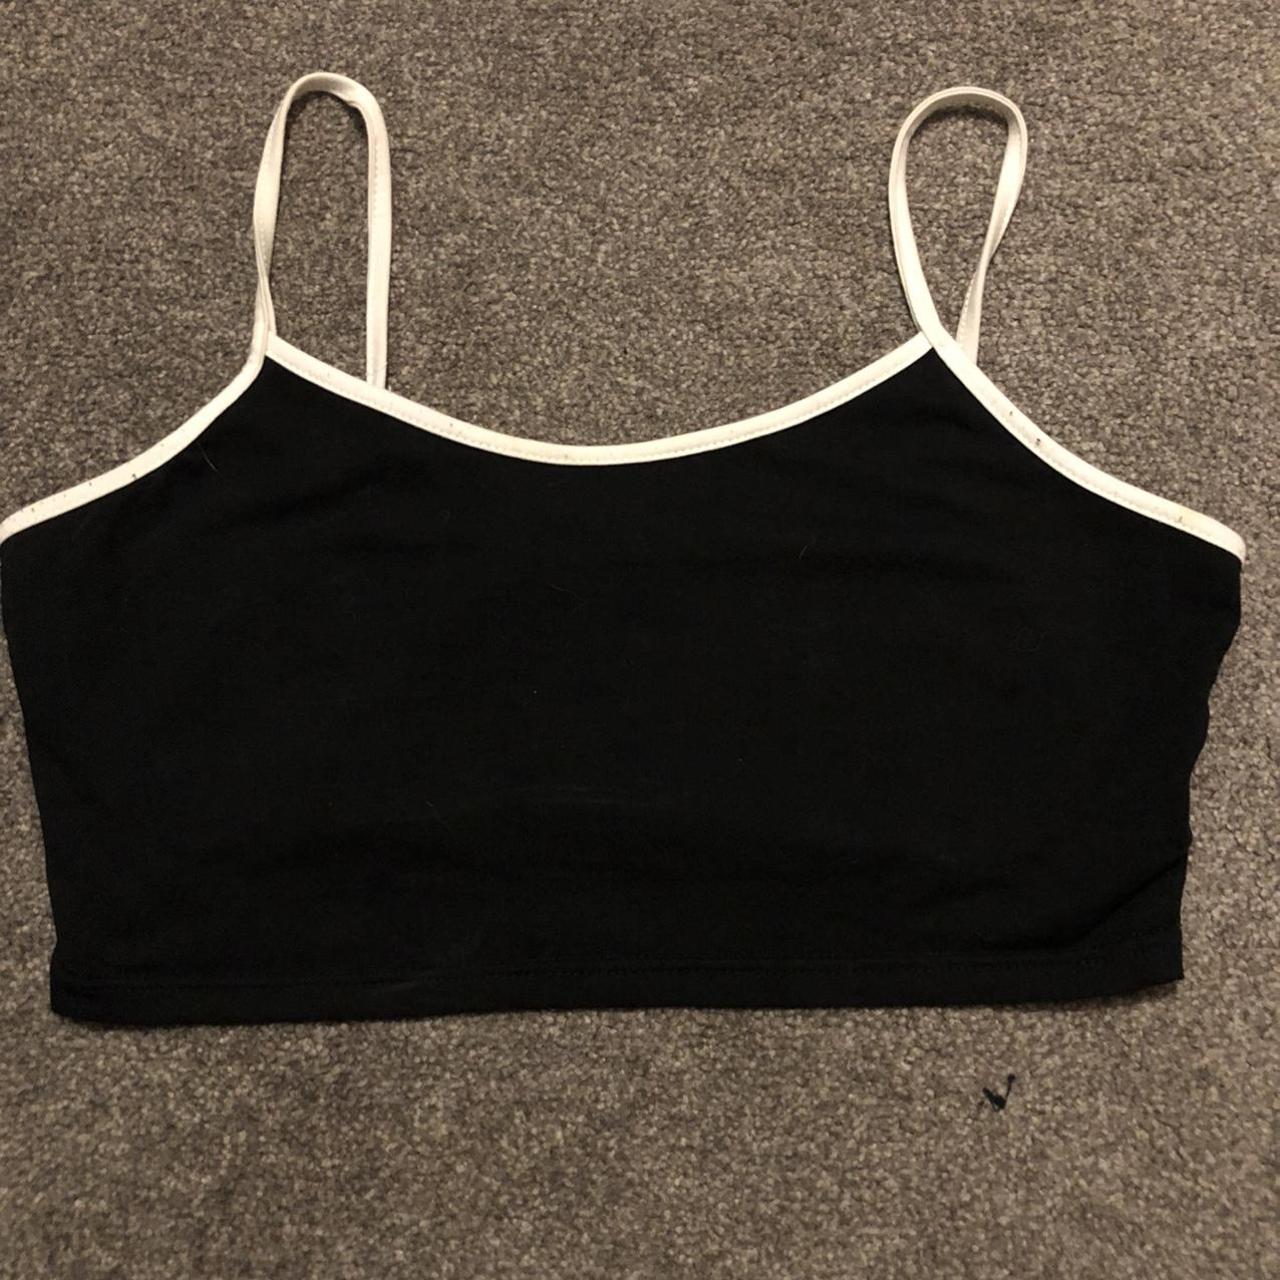 plain black top with white outline size S #croptop - Depop